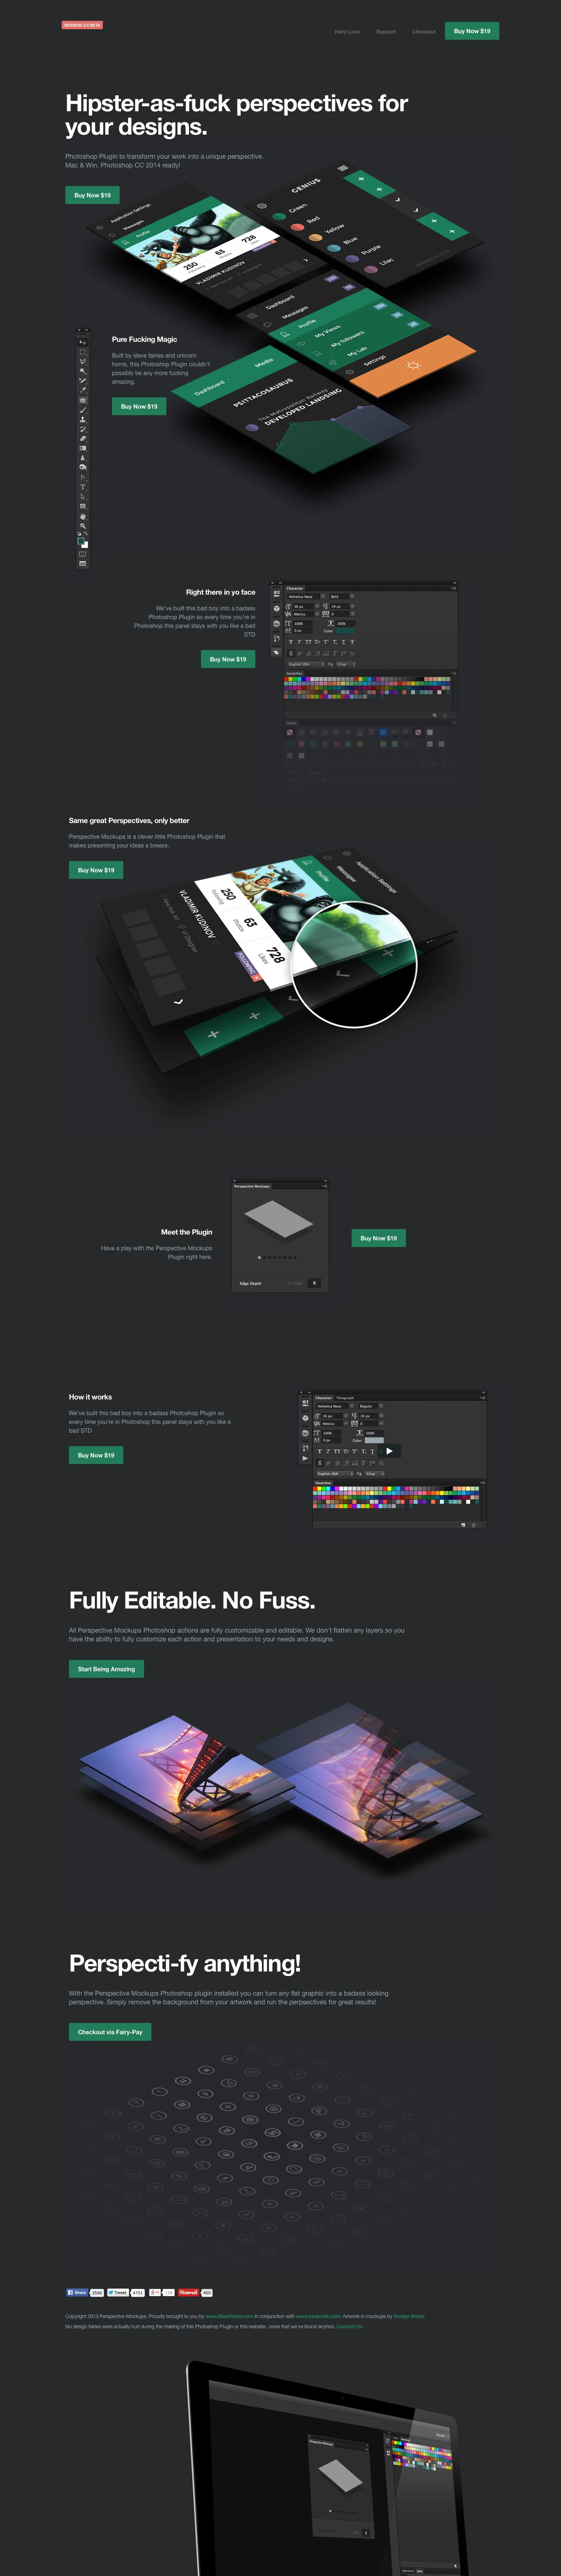 Perspective Mockups Landing Page Example: Photoshop Perspective Mockups Plugin. Perspective Mockups is a clever little Photoshop Plugin that makes presenting your ideas a breeze. Photoshop 2015 ready